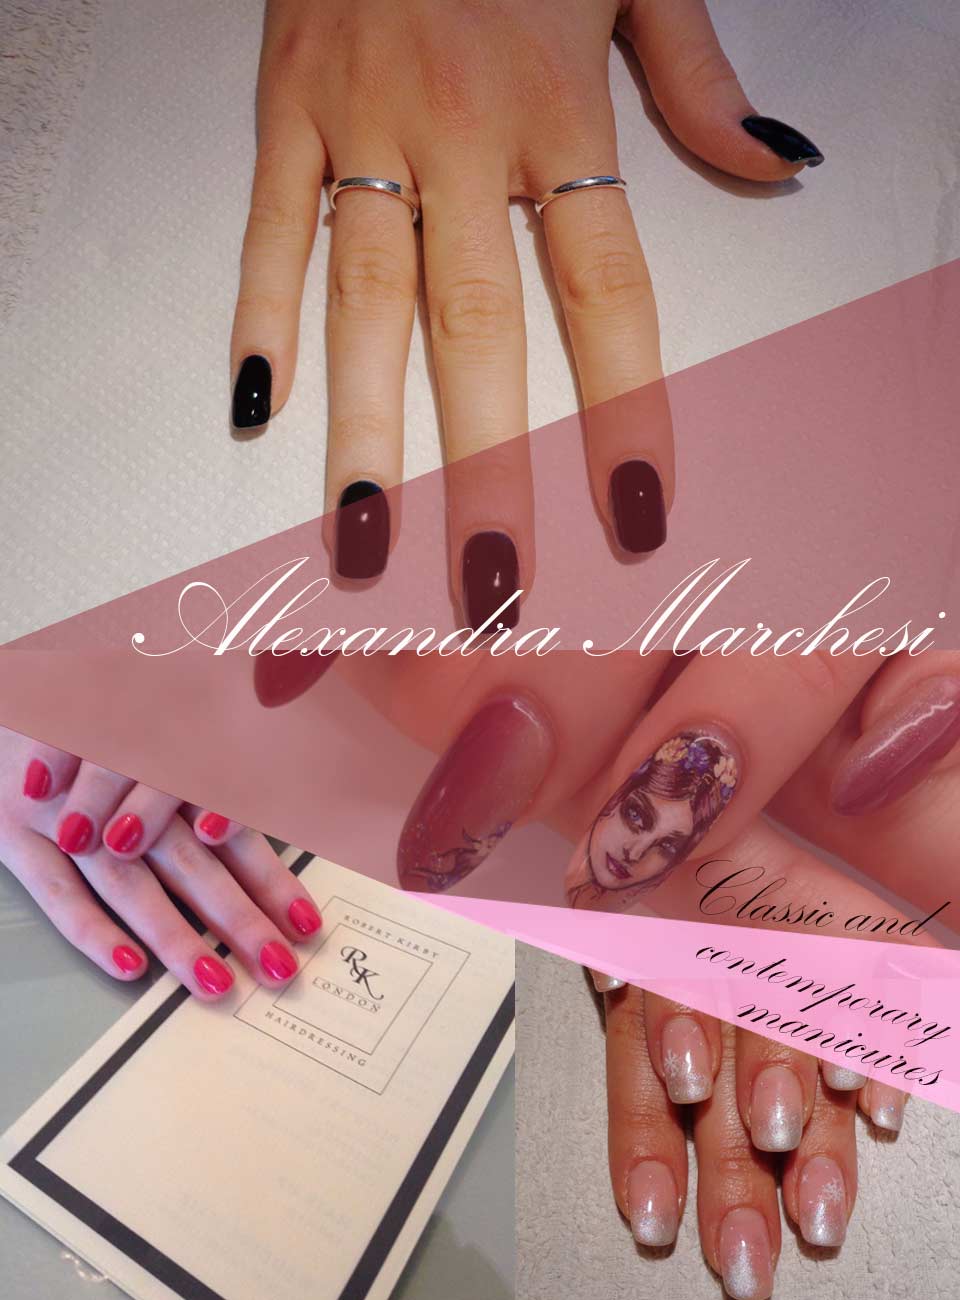 Alessandra-Marchesi-Classic-and-contemporary-manicures-at-Robert-Kirb